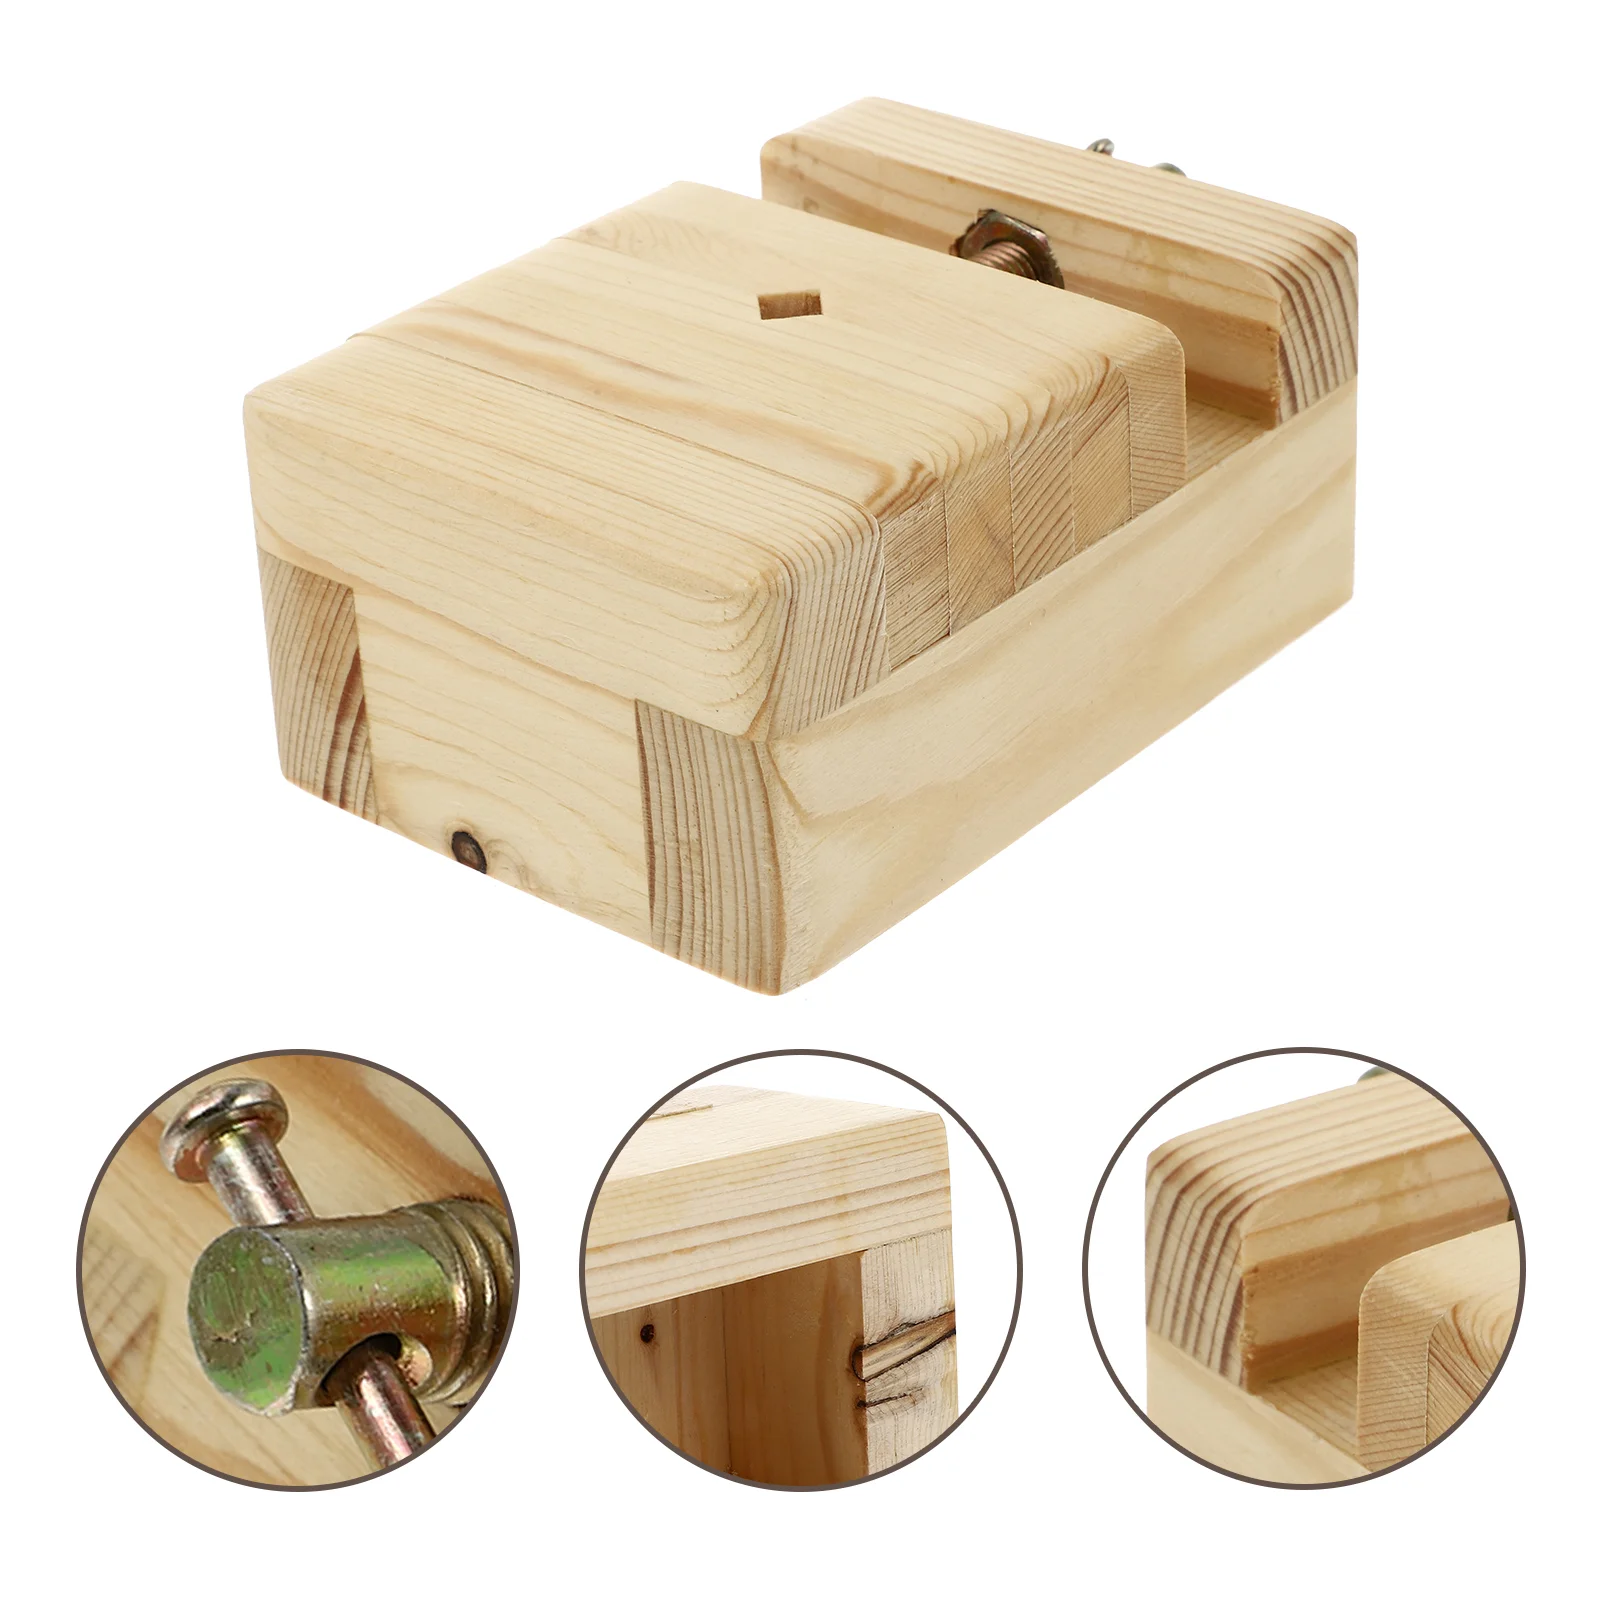 

Tool Seal Stamp Engraved Bed Carving Handcraft Engraving Device Kit Clamp Fixing Wood Stone Practical Block Chapter Crafts